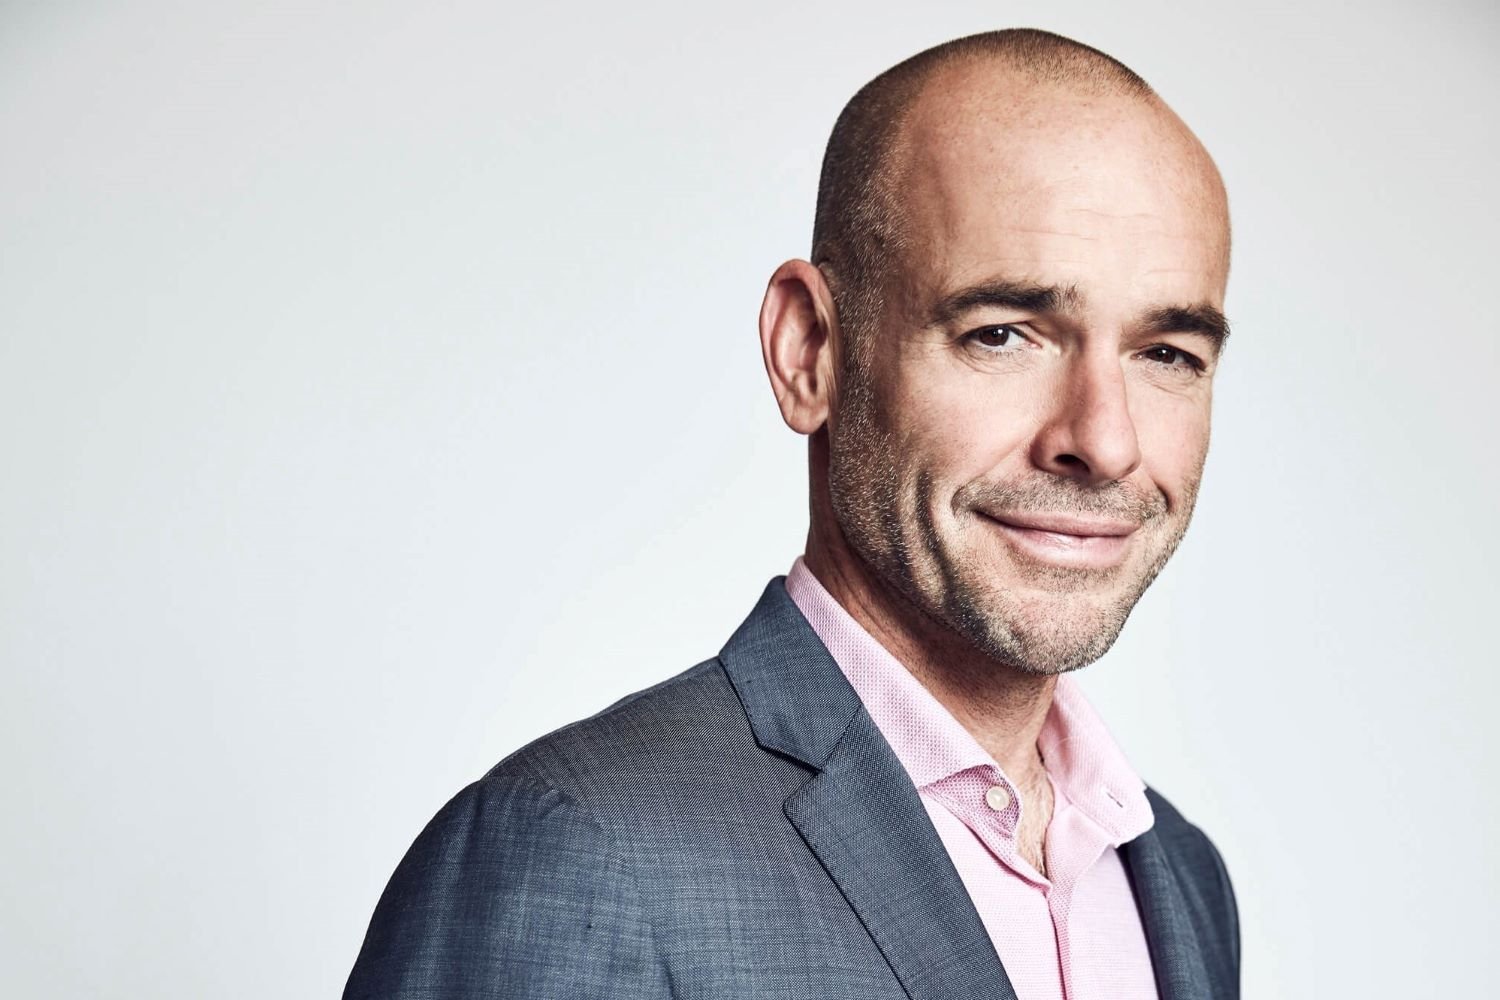 Paul Blackthorne, who guest stars in 'The Company You Keep' Season 1 Episode 5, wears a dark gray suit over a light pink button-up shirt.